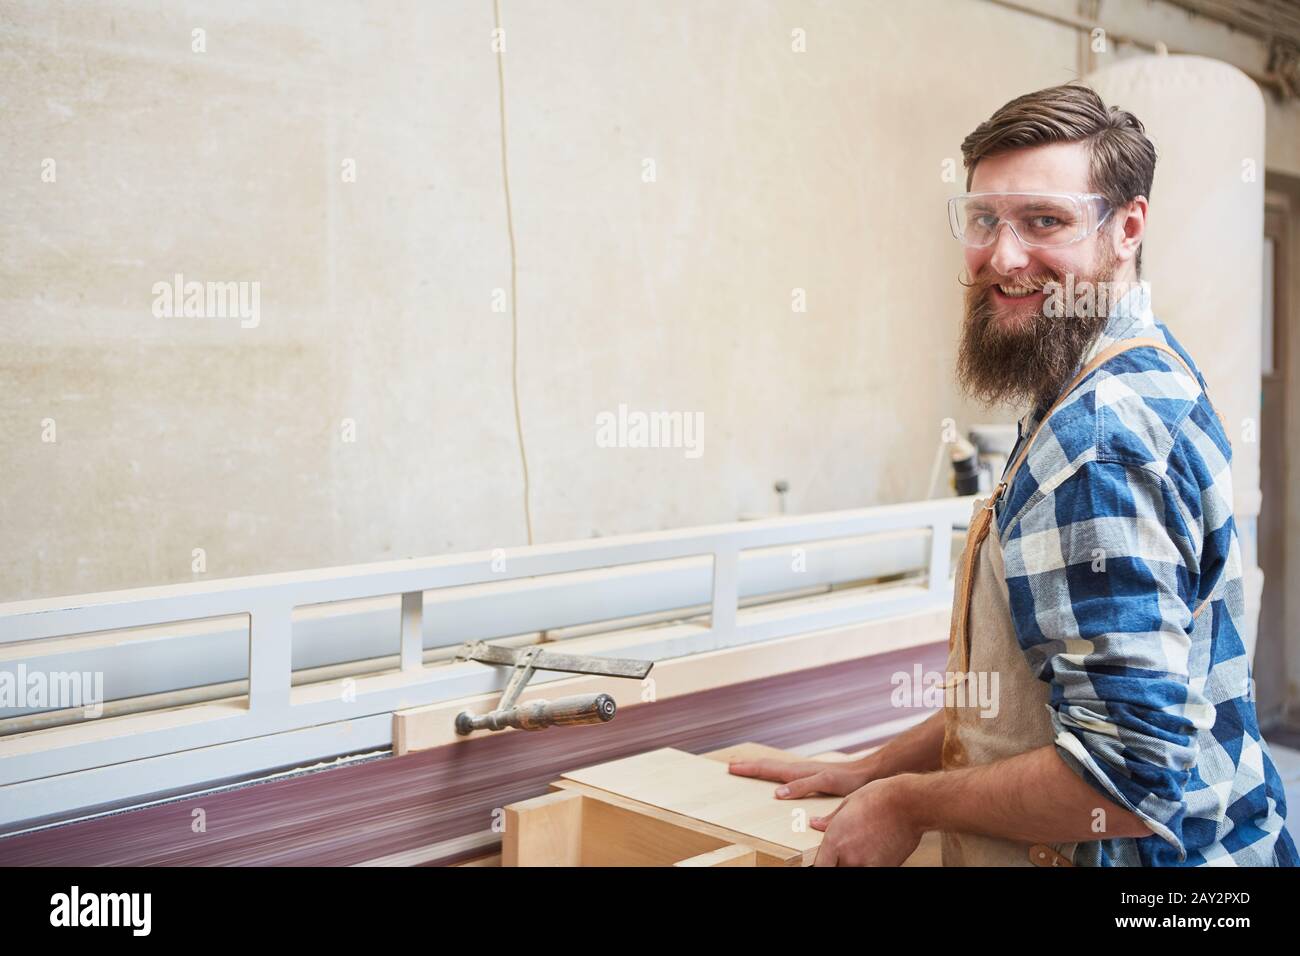 Carpenter apprentice with wood on the grinding machine during furniture construction in the workshop Stock Photo